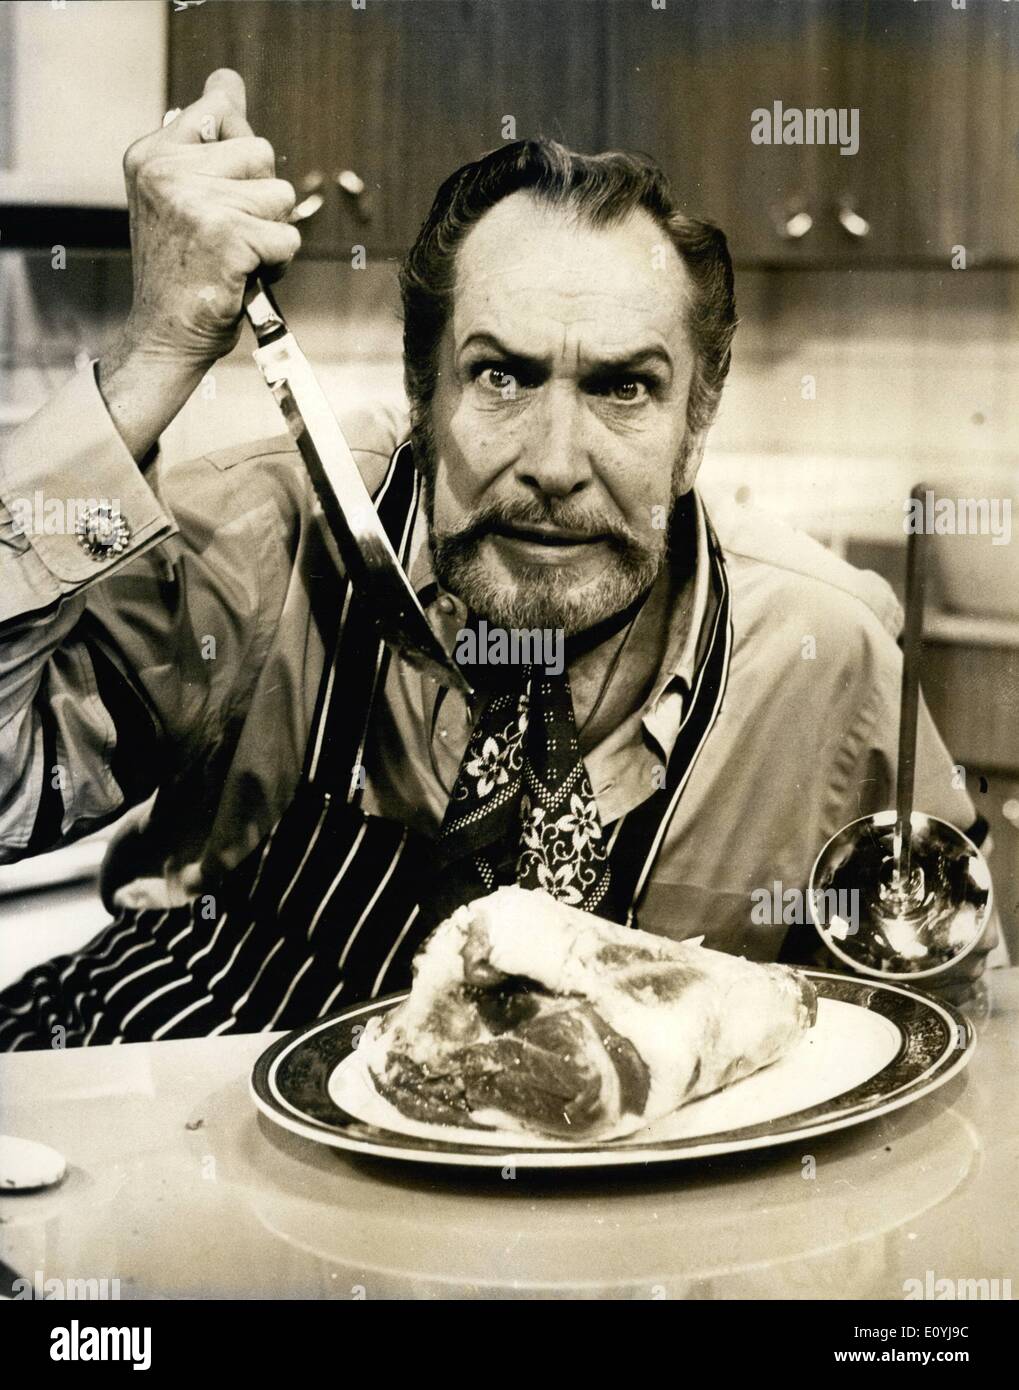 Jul. 07, 1970 - Vincent Price To Star In Cookery Series For Thames Television: Film star Vincent Price, ''horror king'' of American movies, is in London for a week to star in his own cookery series for Thames Television. Price, who has made over 80 films, is also a famous amateur chef and connoisseur of good food. He has written several books on the subject but this is the first time he has starred in a cookery series. The series ''Cooking Price-Wise'', will have an international flavour, featuring dishes from all over world, collected by Mr.and Mrs. Price on their travels Stock Photo